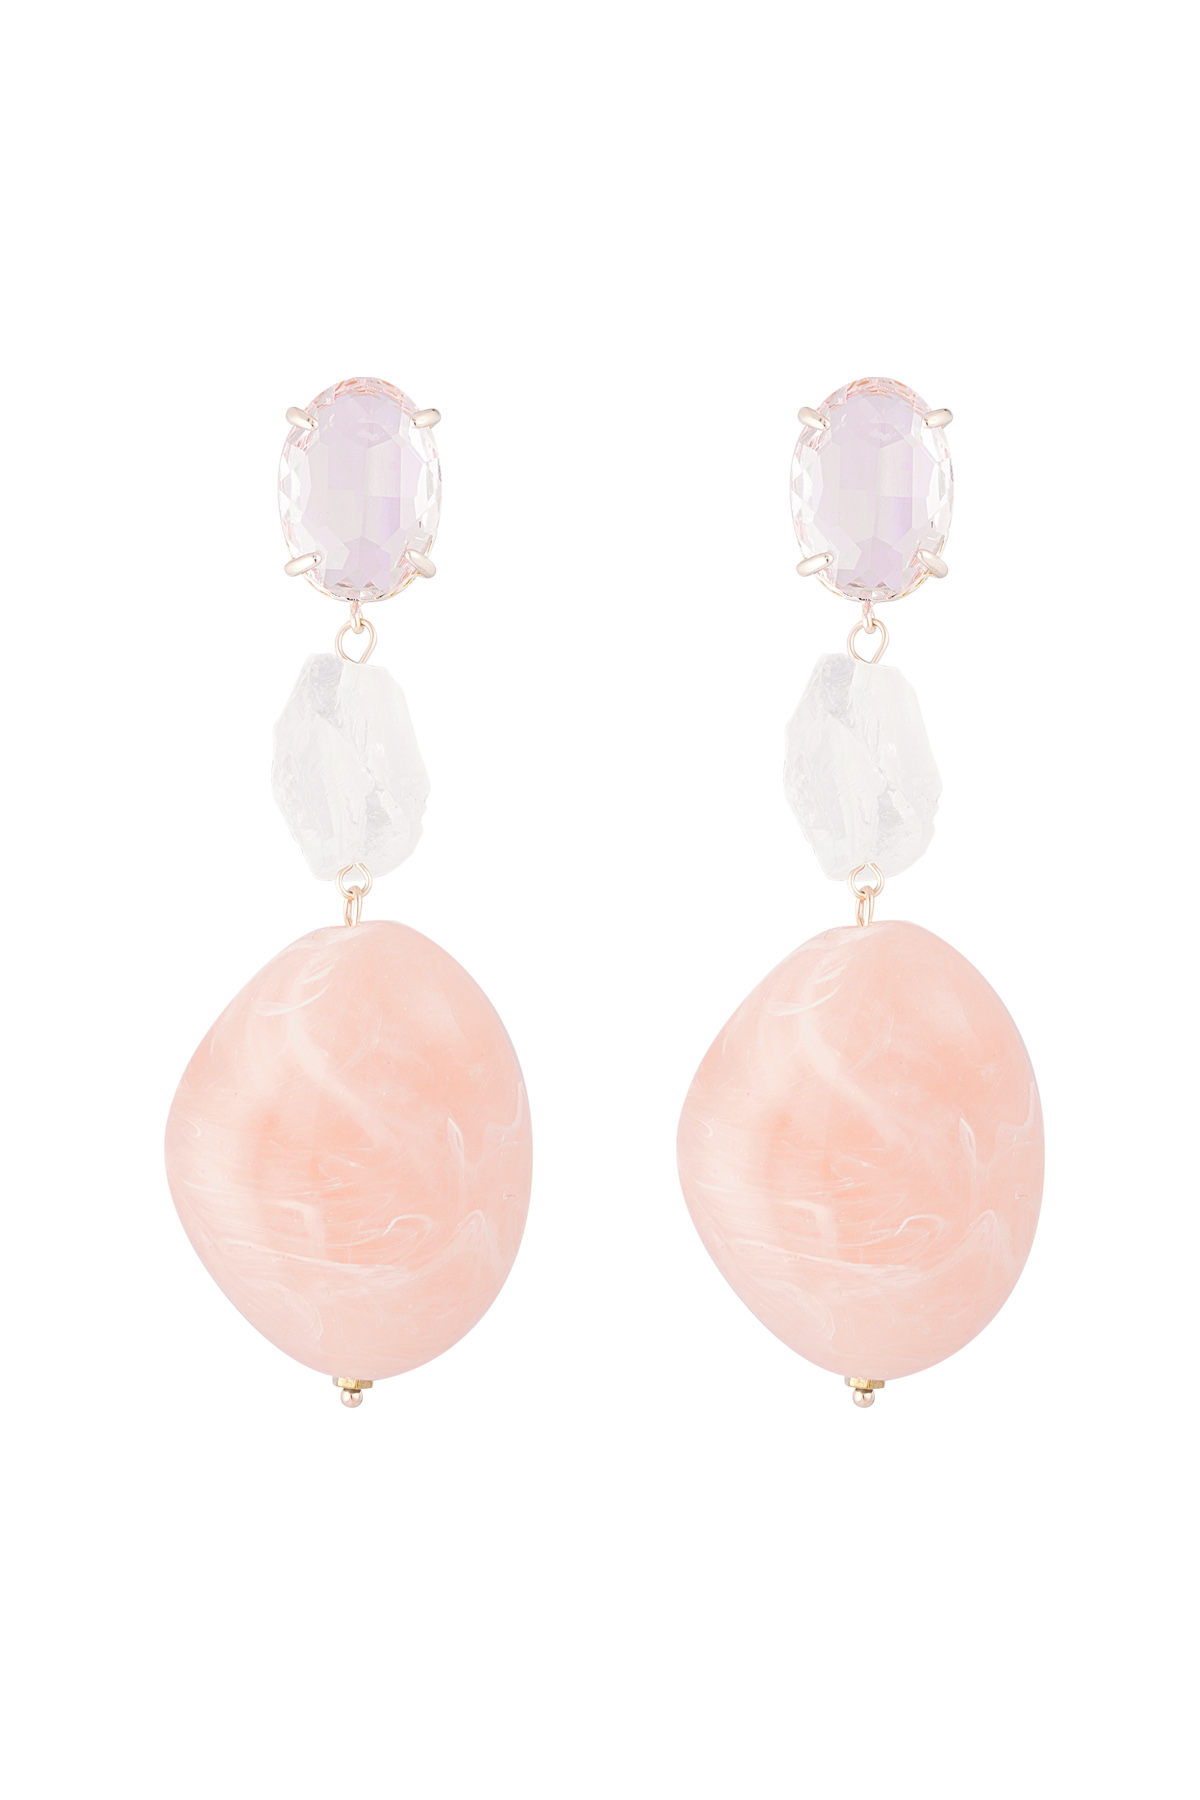 Statement glass earrings - pink  h5 